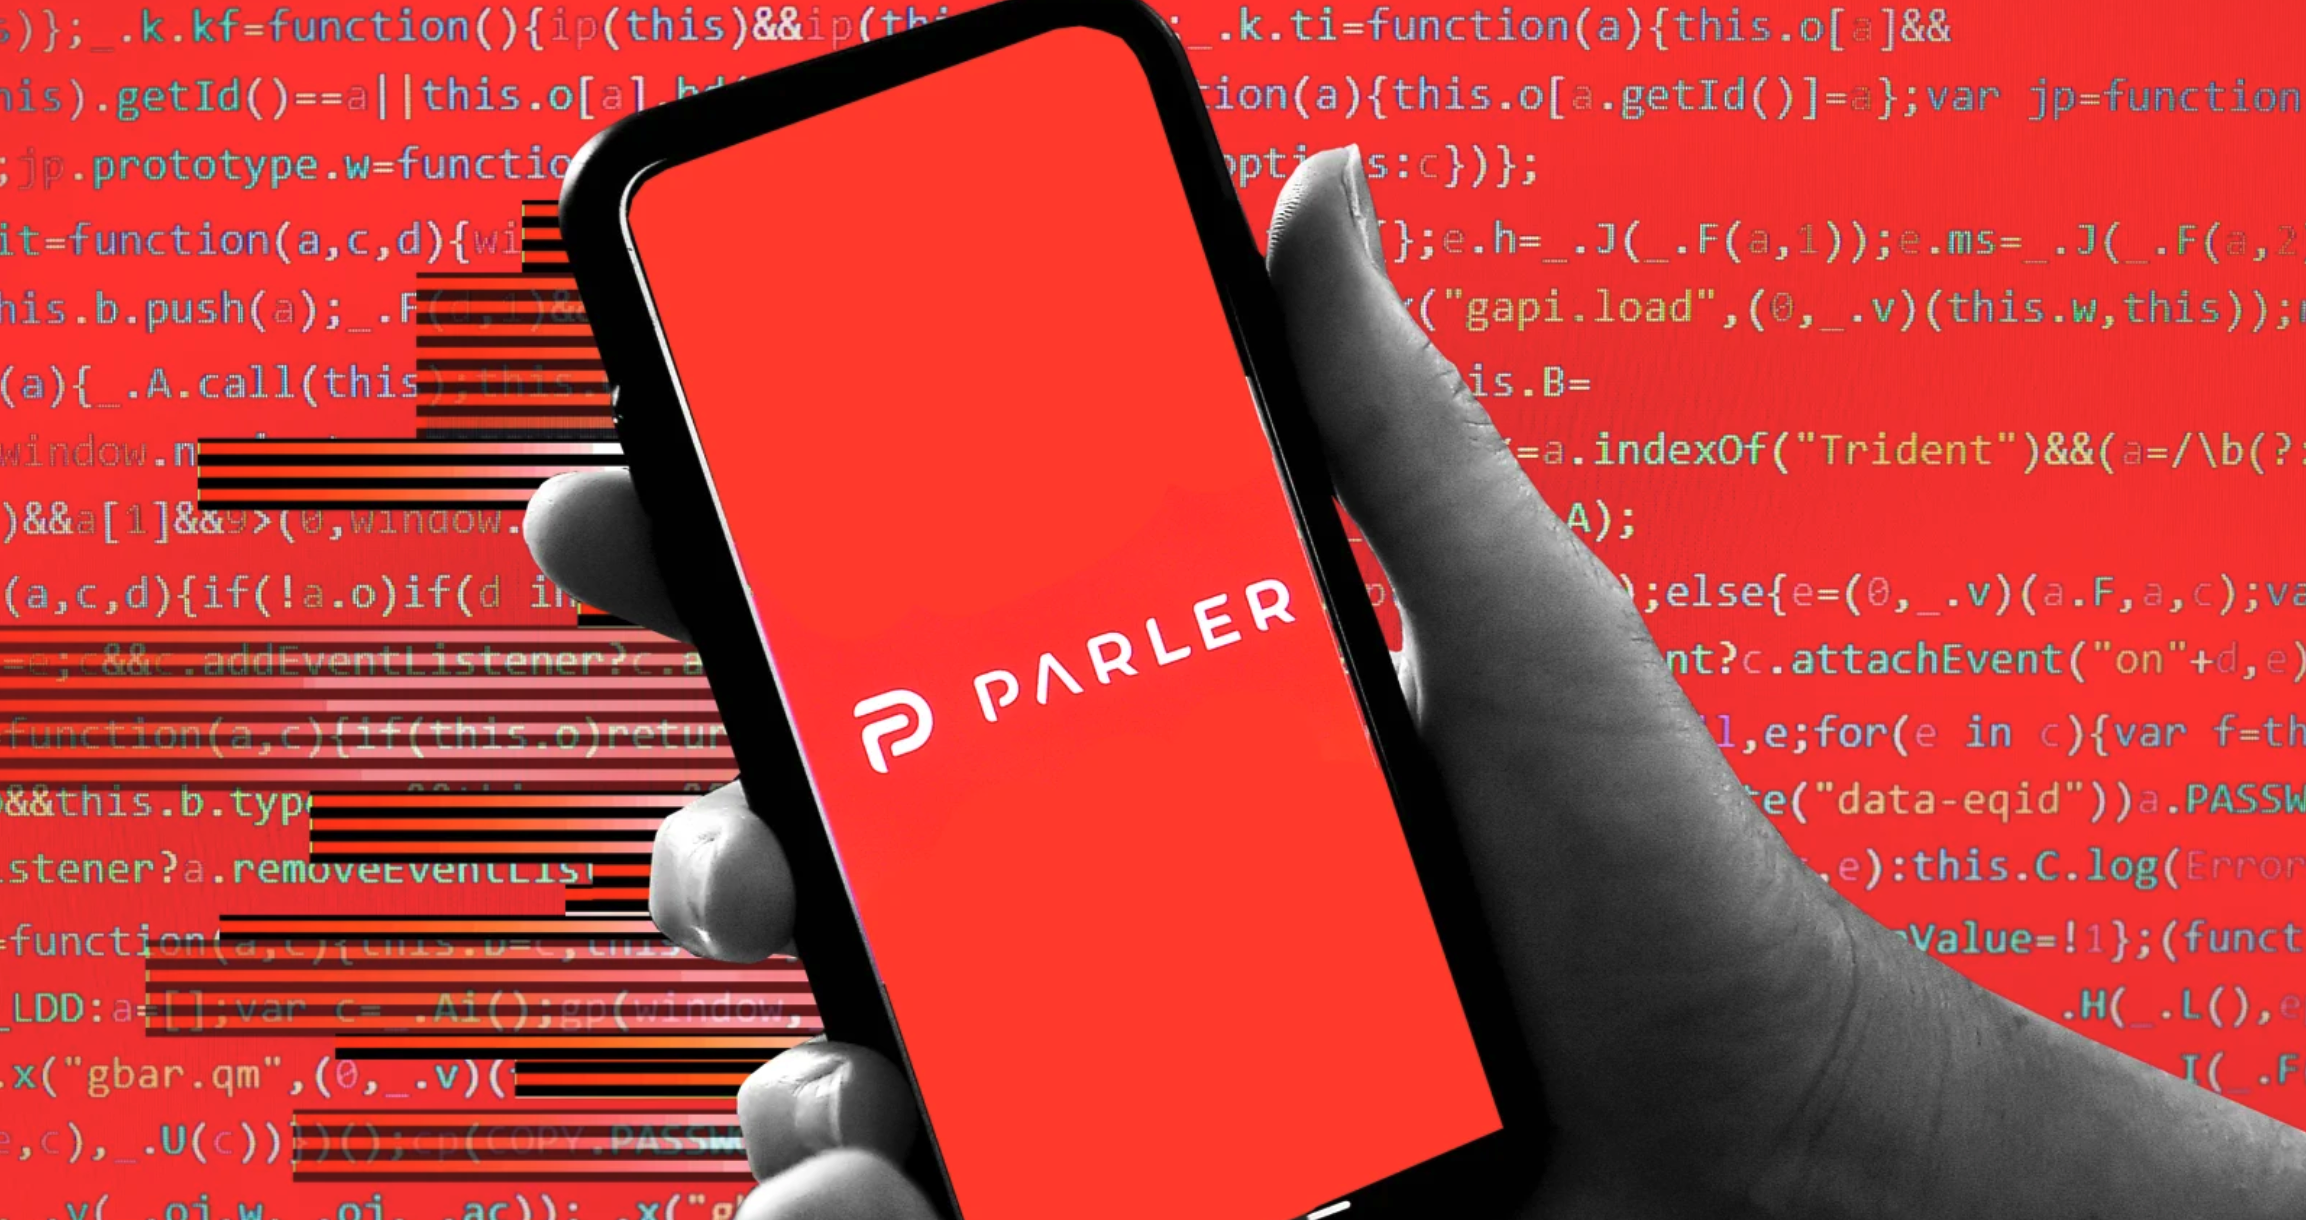 Parler Wasn’t Hacked, but That Doesn’t Mean It’s Safe to Use